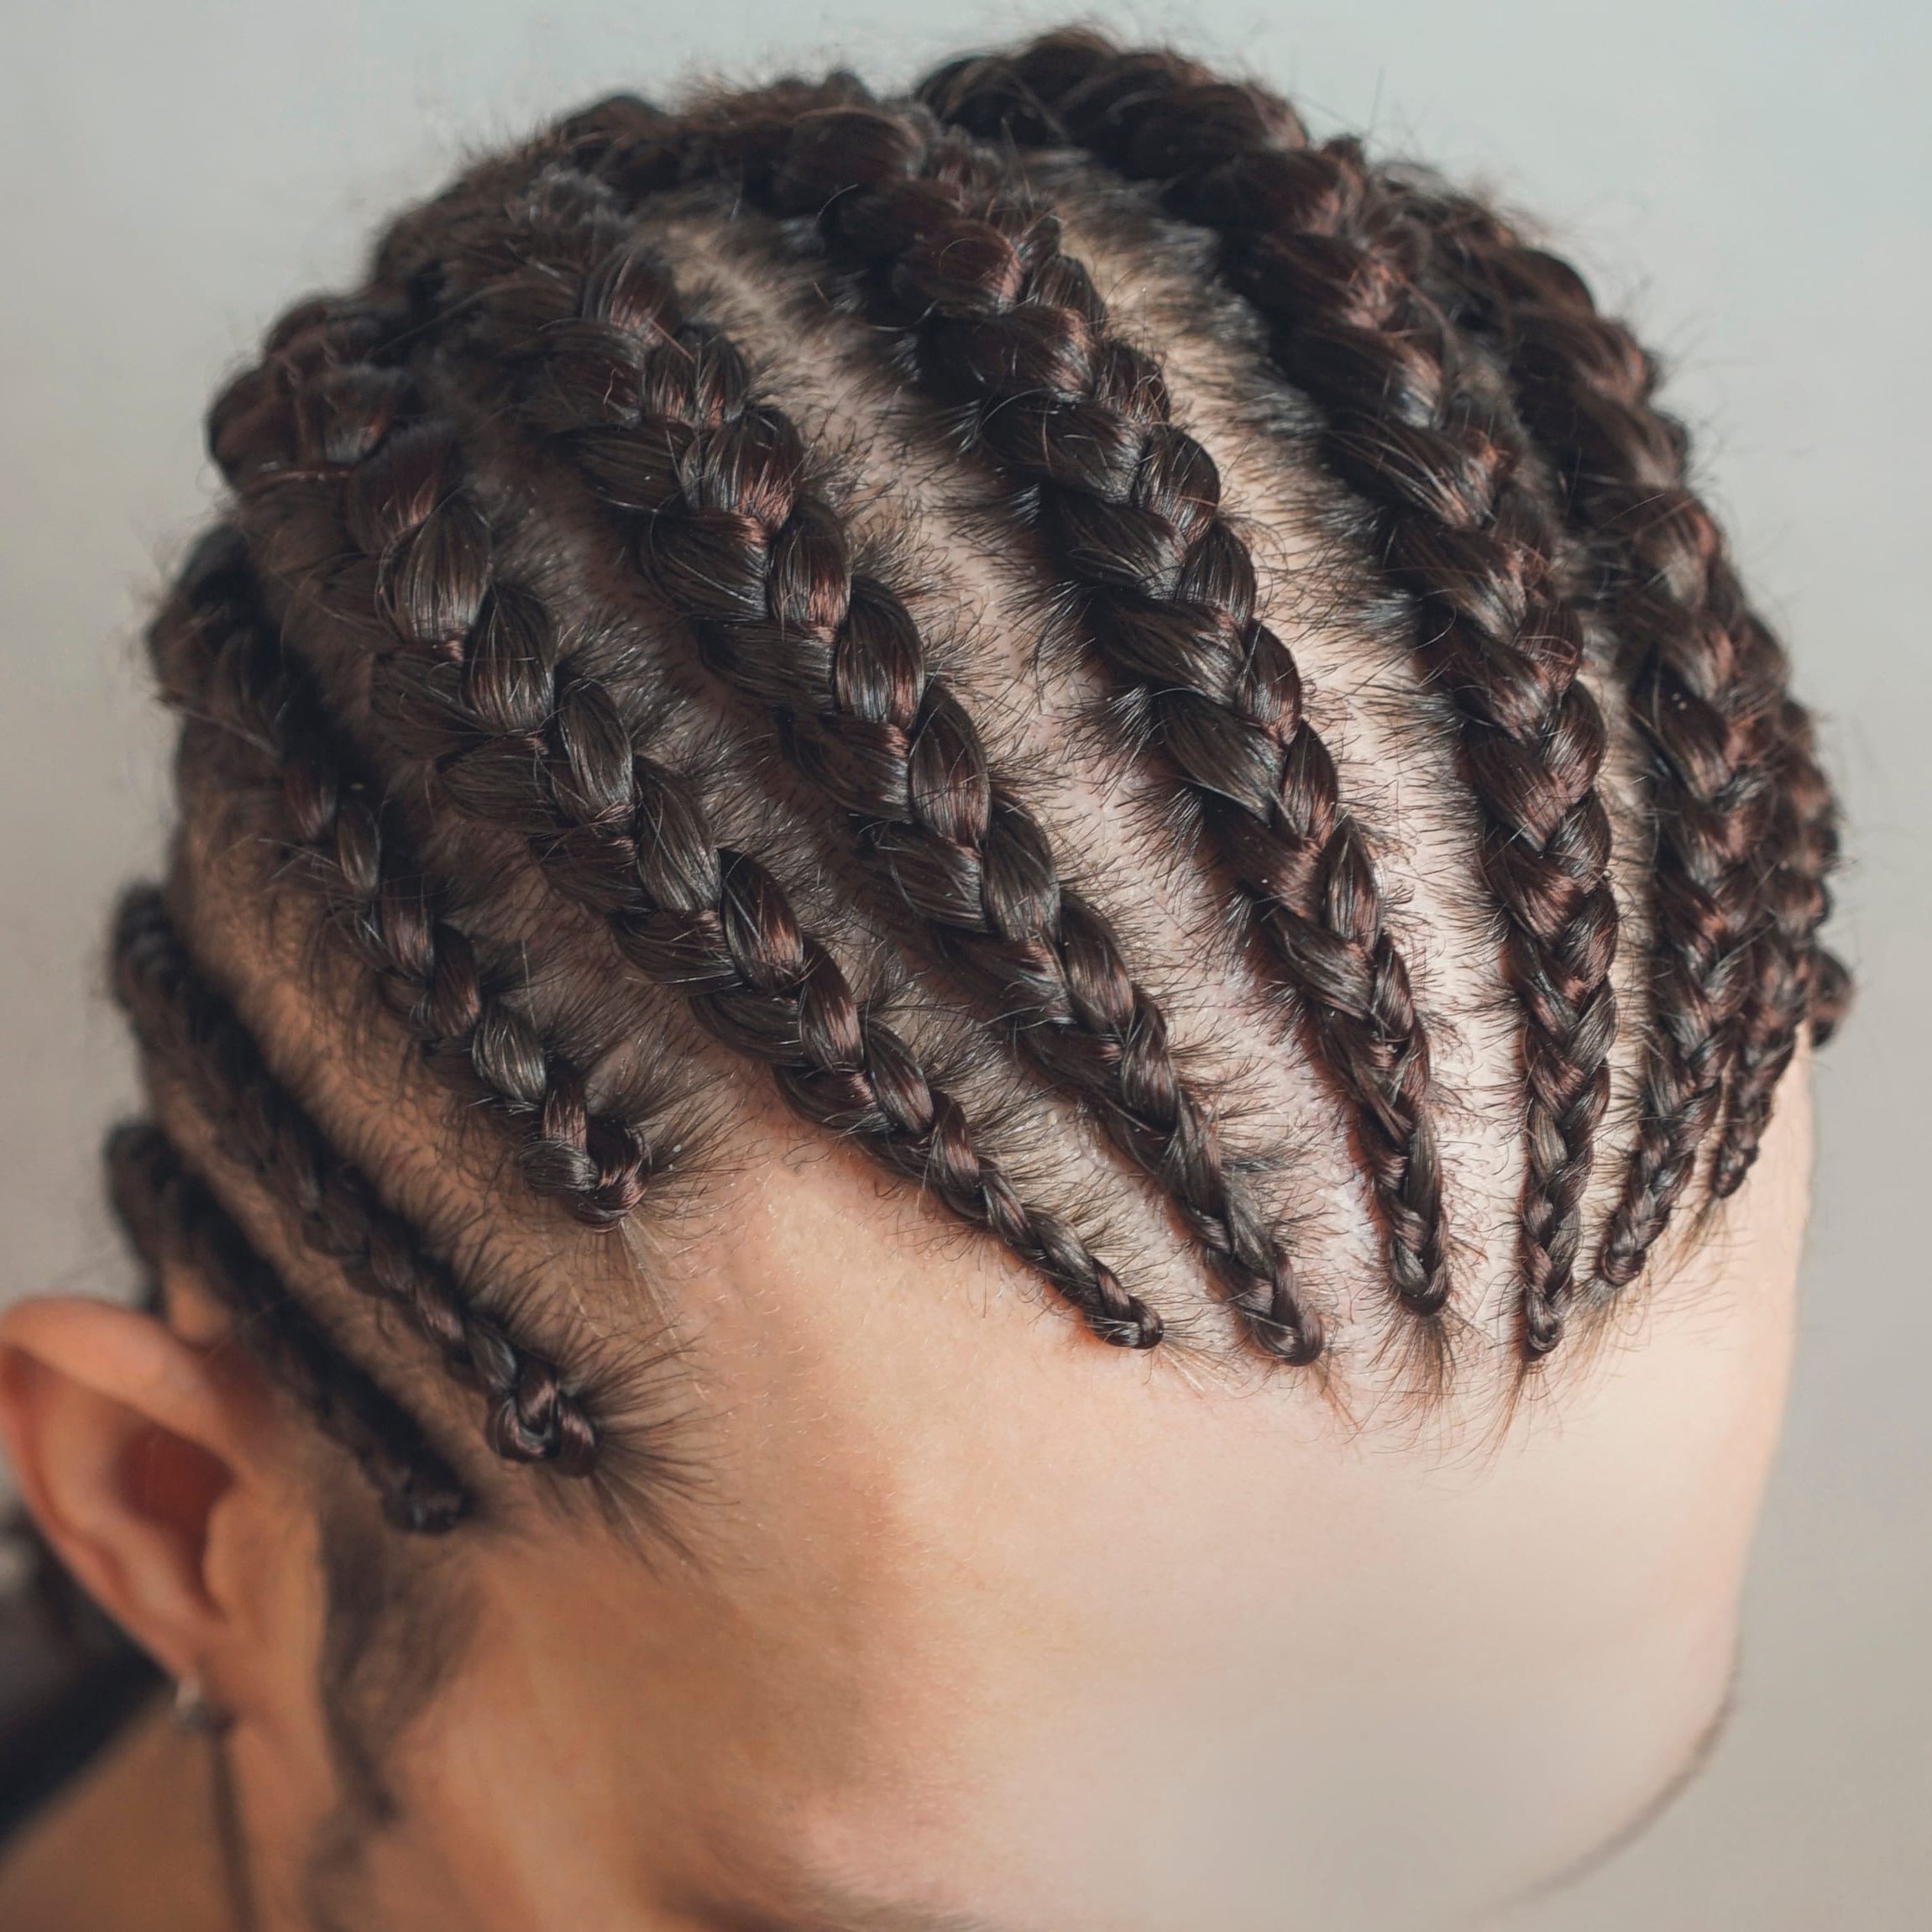 Manbraid Alert: An Easy Guide To Braids For Men Intended For 2019 Red Inward Under Braid Hairstyles (View 9 of 20)